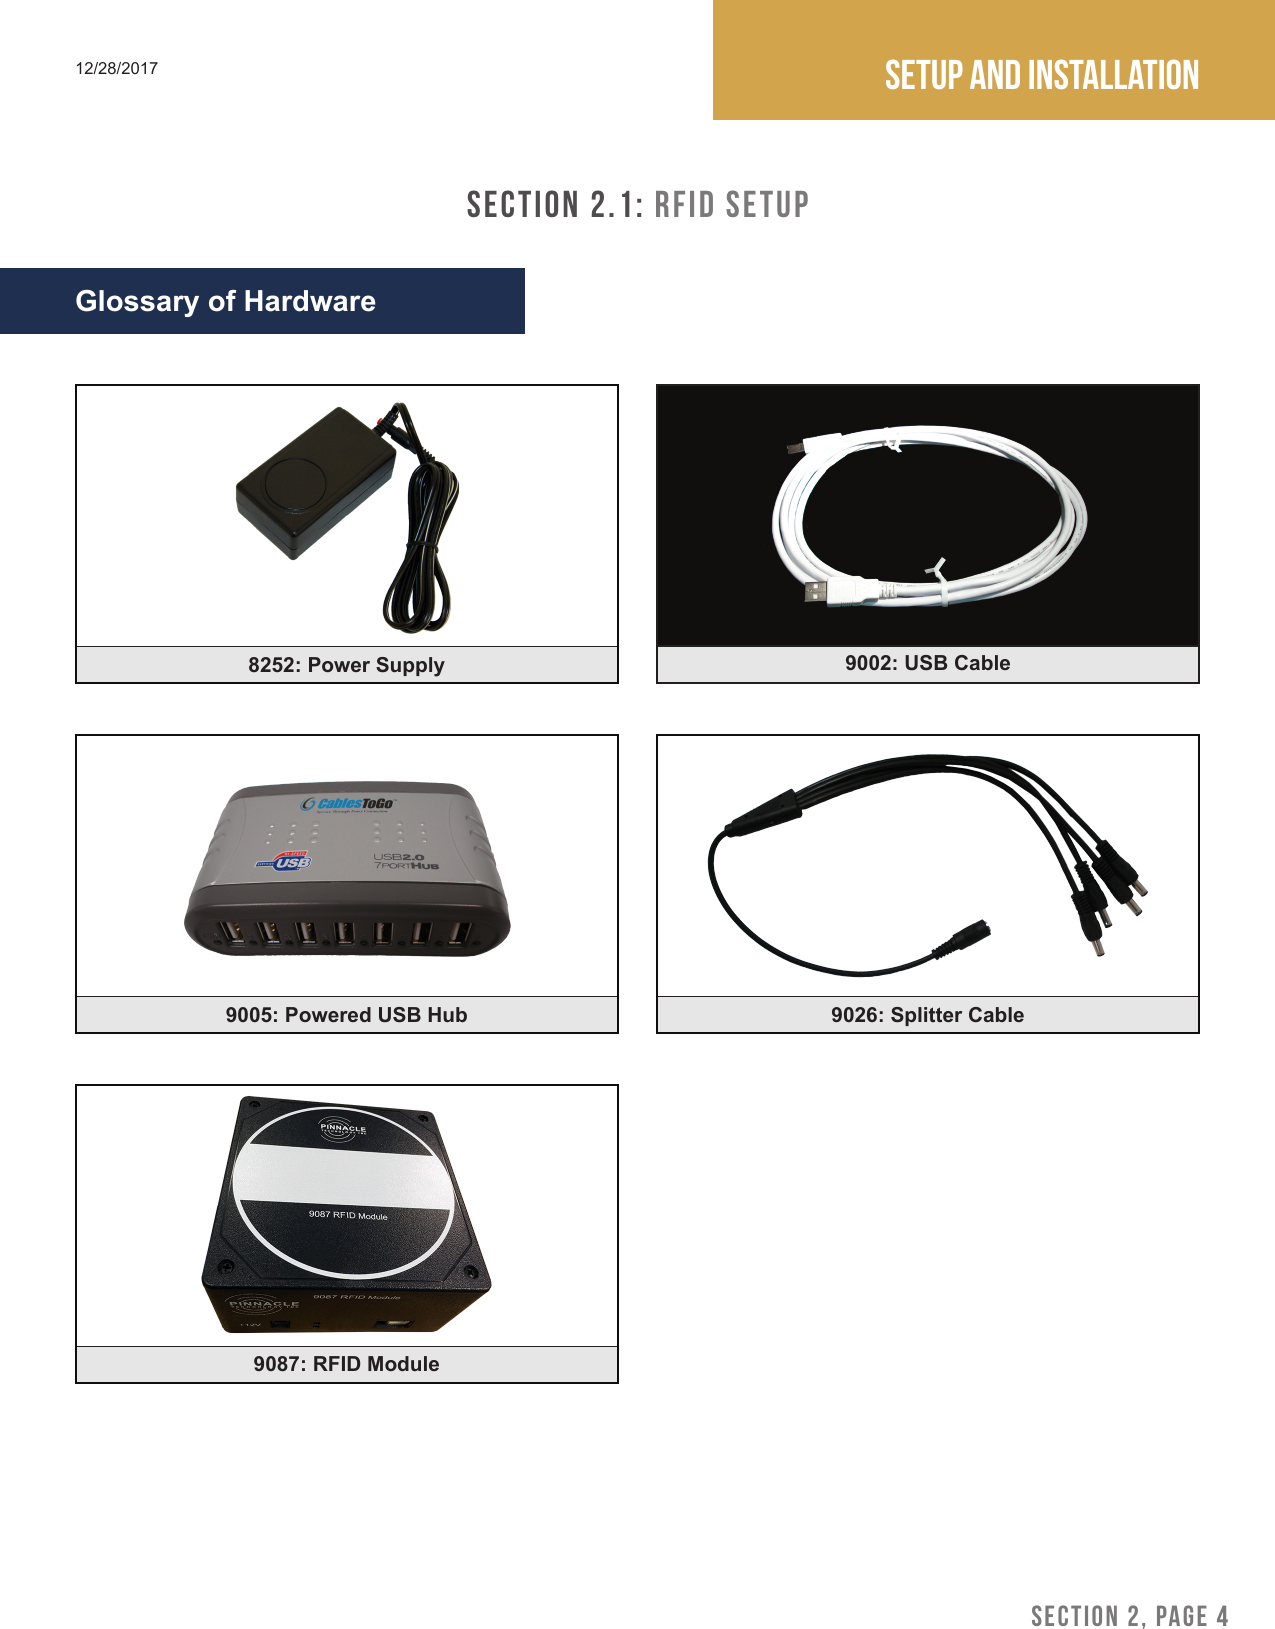 SECTION 2, PAGE 4Setup and installation12/28/2017SECTION 2.1: RFID SetupGlossary of Hardware9002: USB Cable9005: Powered USB Hub 9026: Splitter Cable9087: RFID Module8252: Power Supply